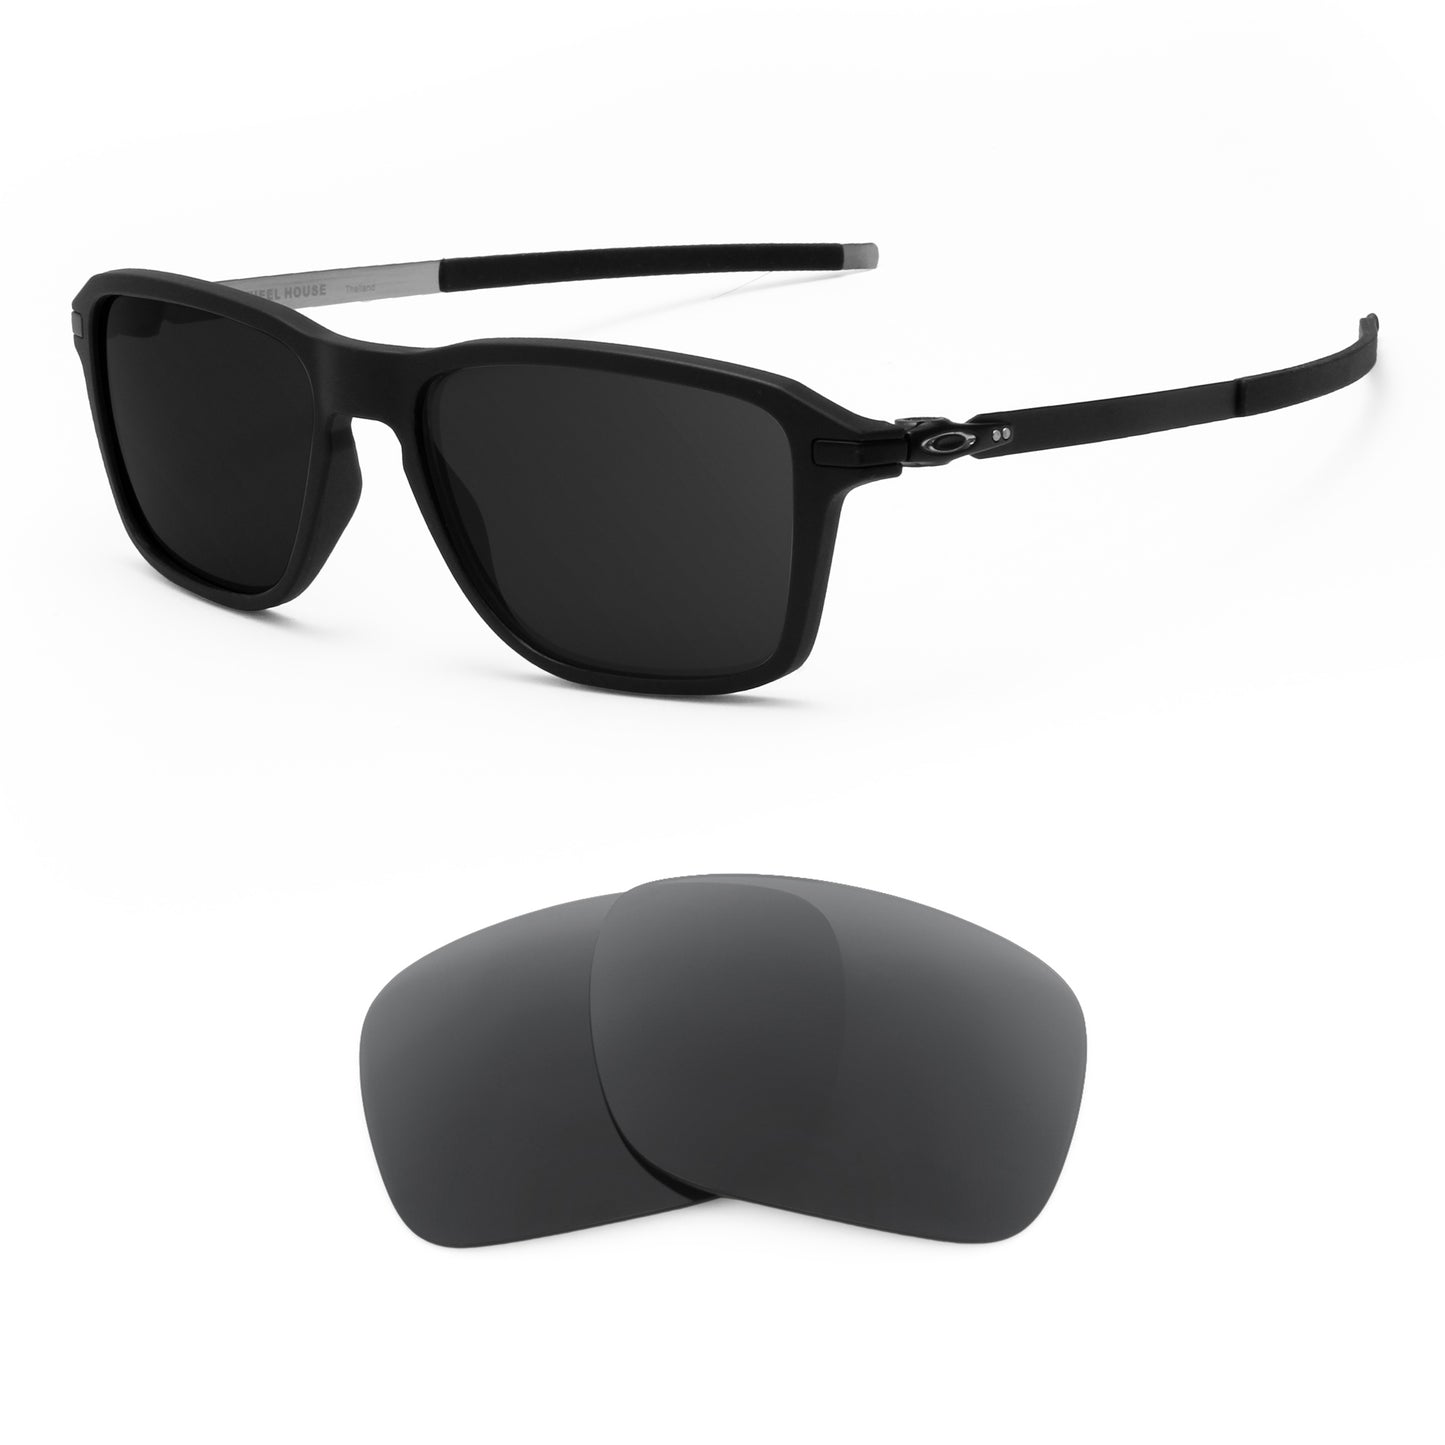 Oakley Wheel House Rx 54 sunglasses with replacement lenses